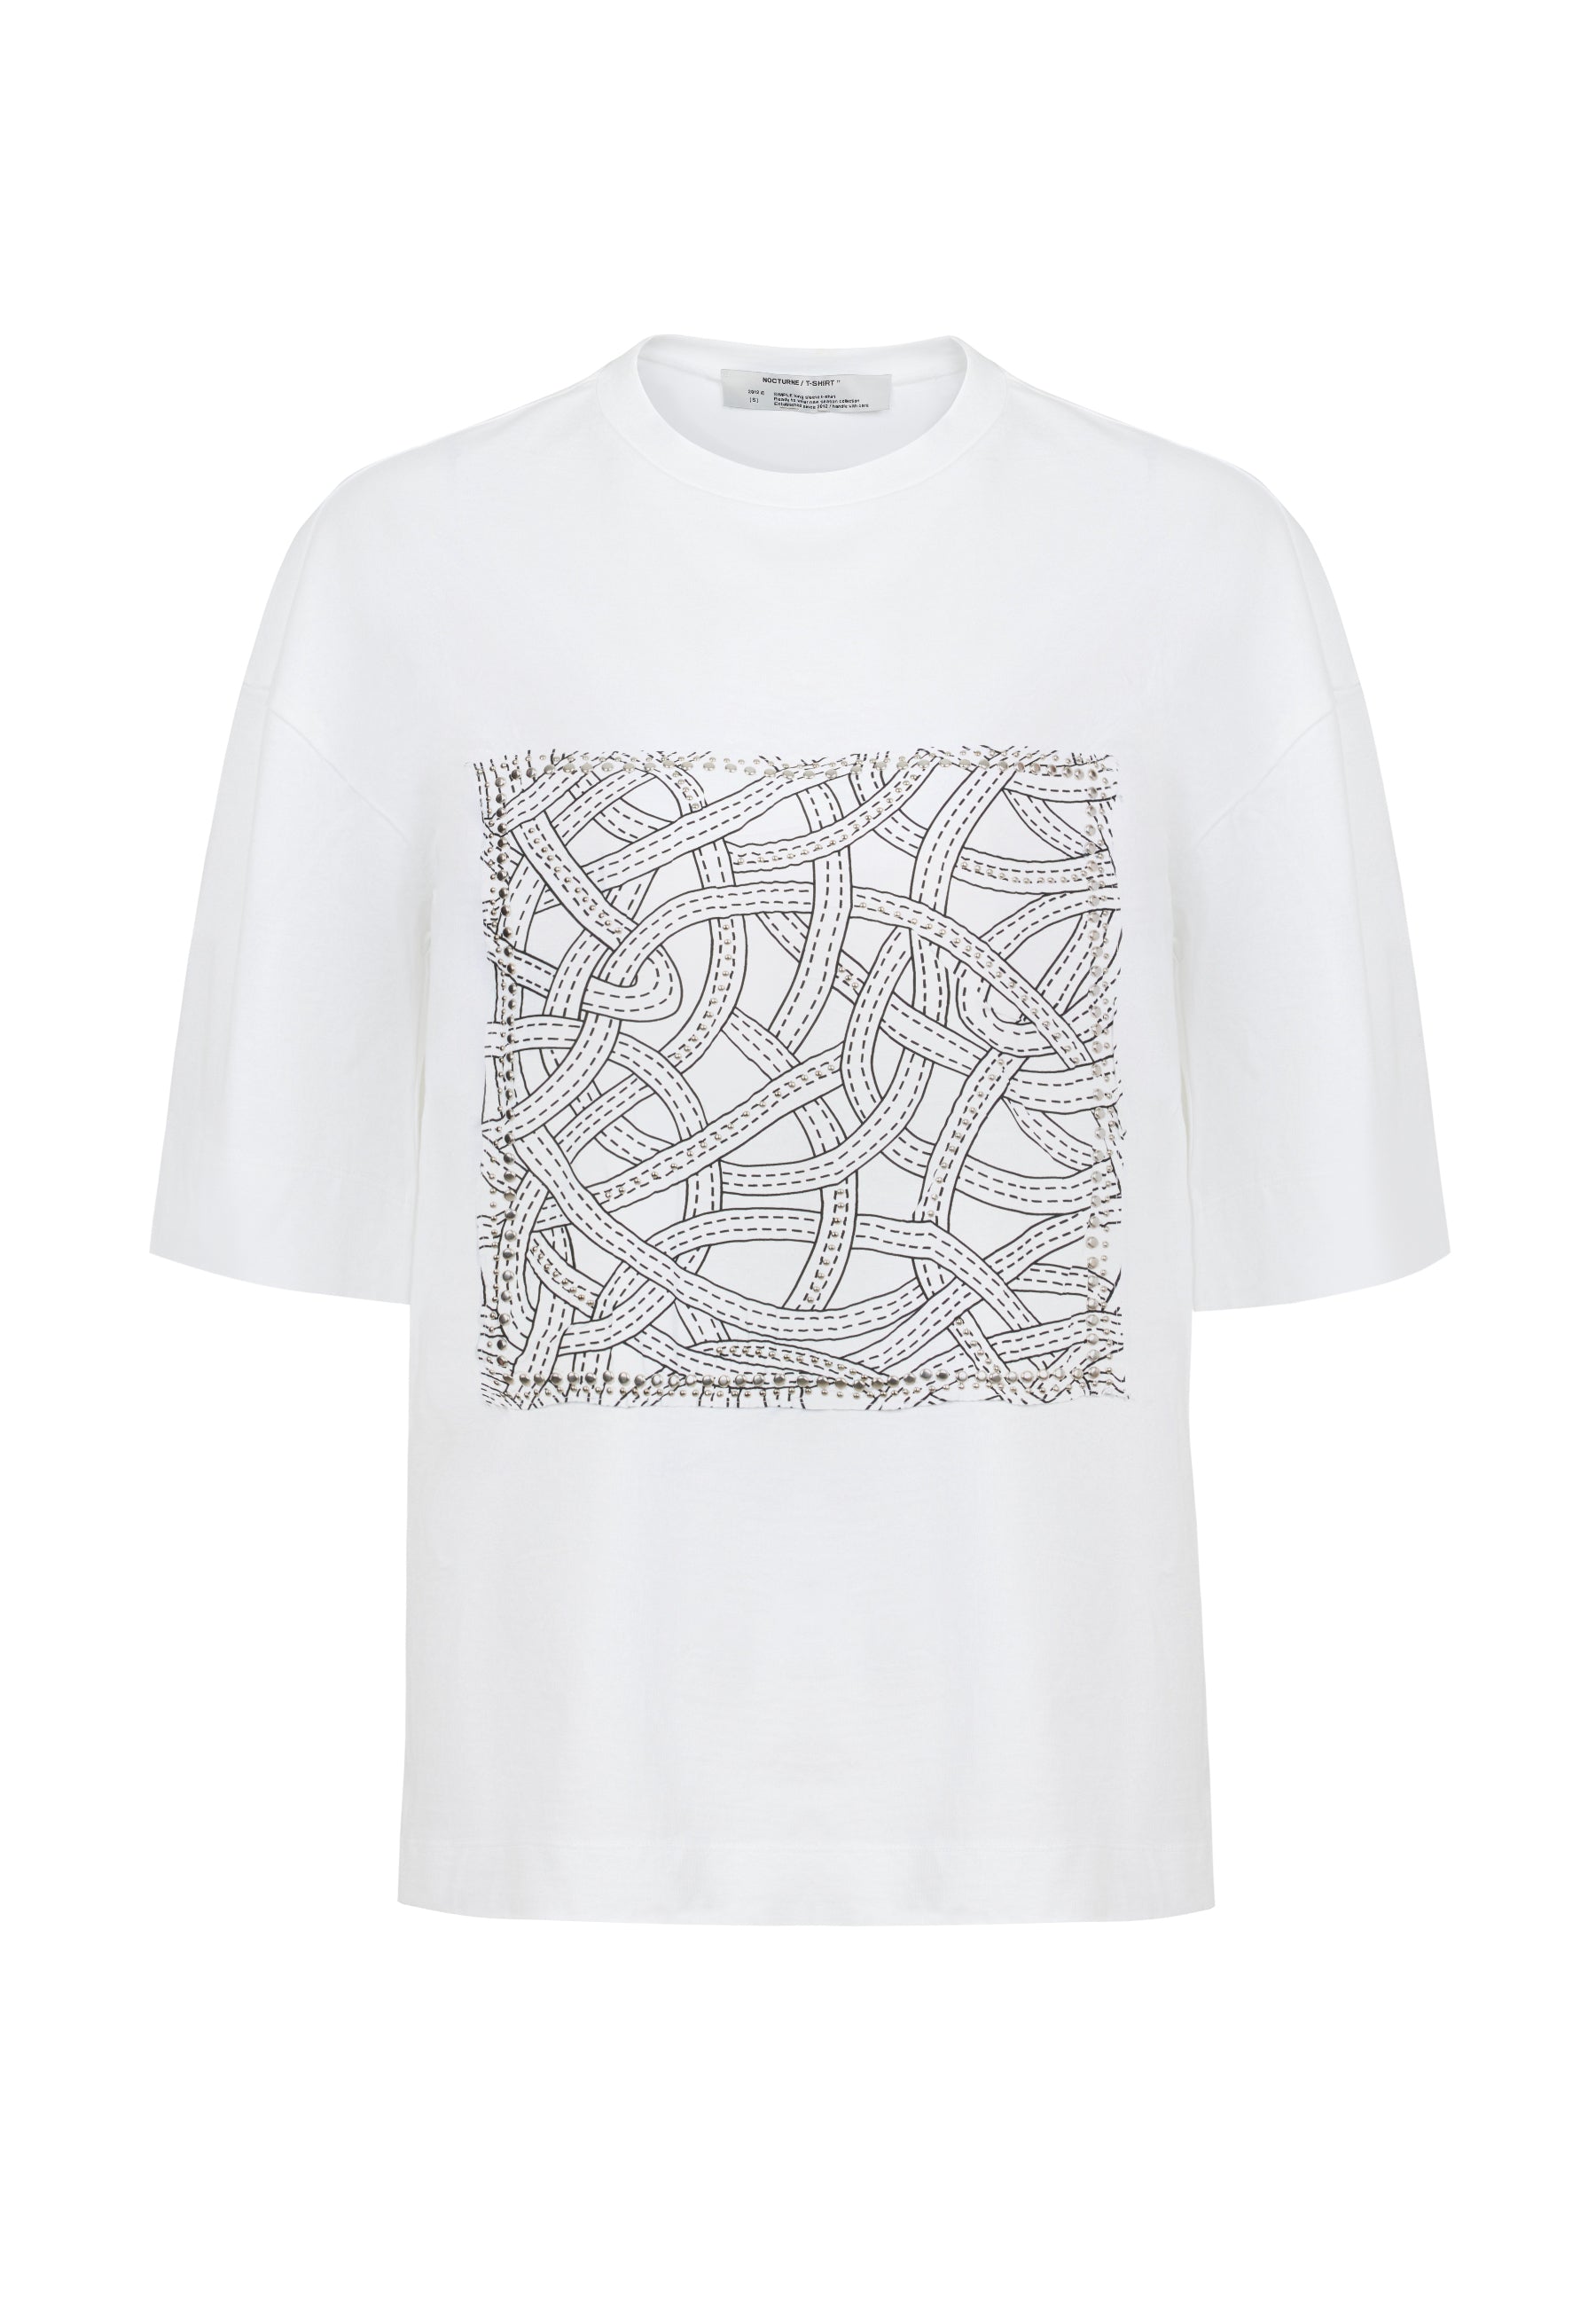 Shop Nocturne Women's White Printed Oversize T-shirt